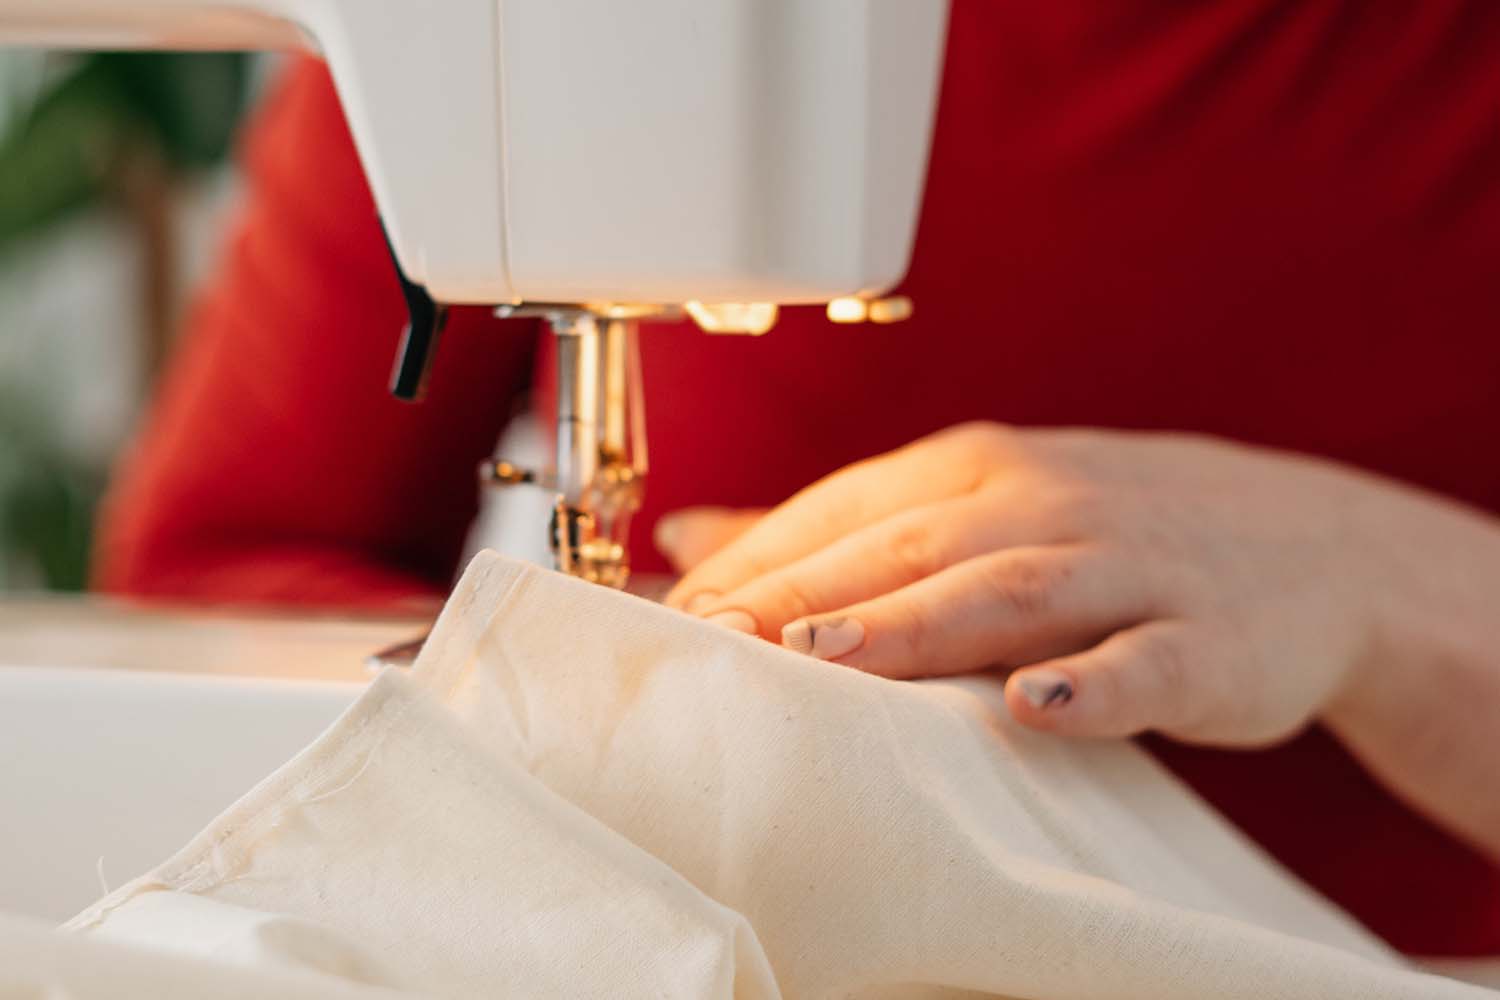 Serger vs. Sewing Machine: Which is Better for Garments?